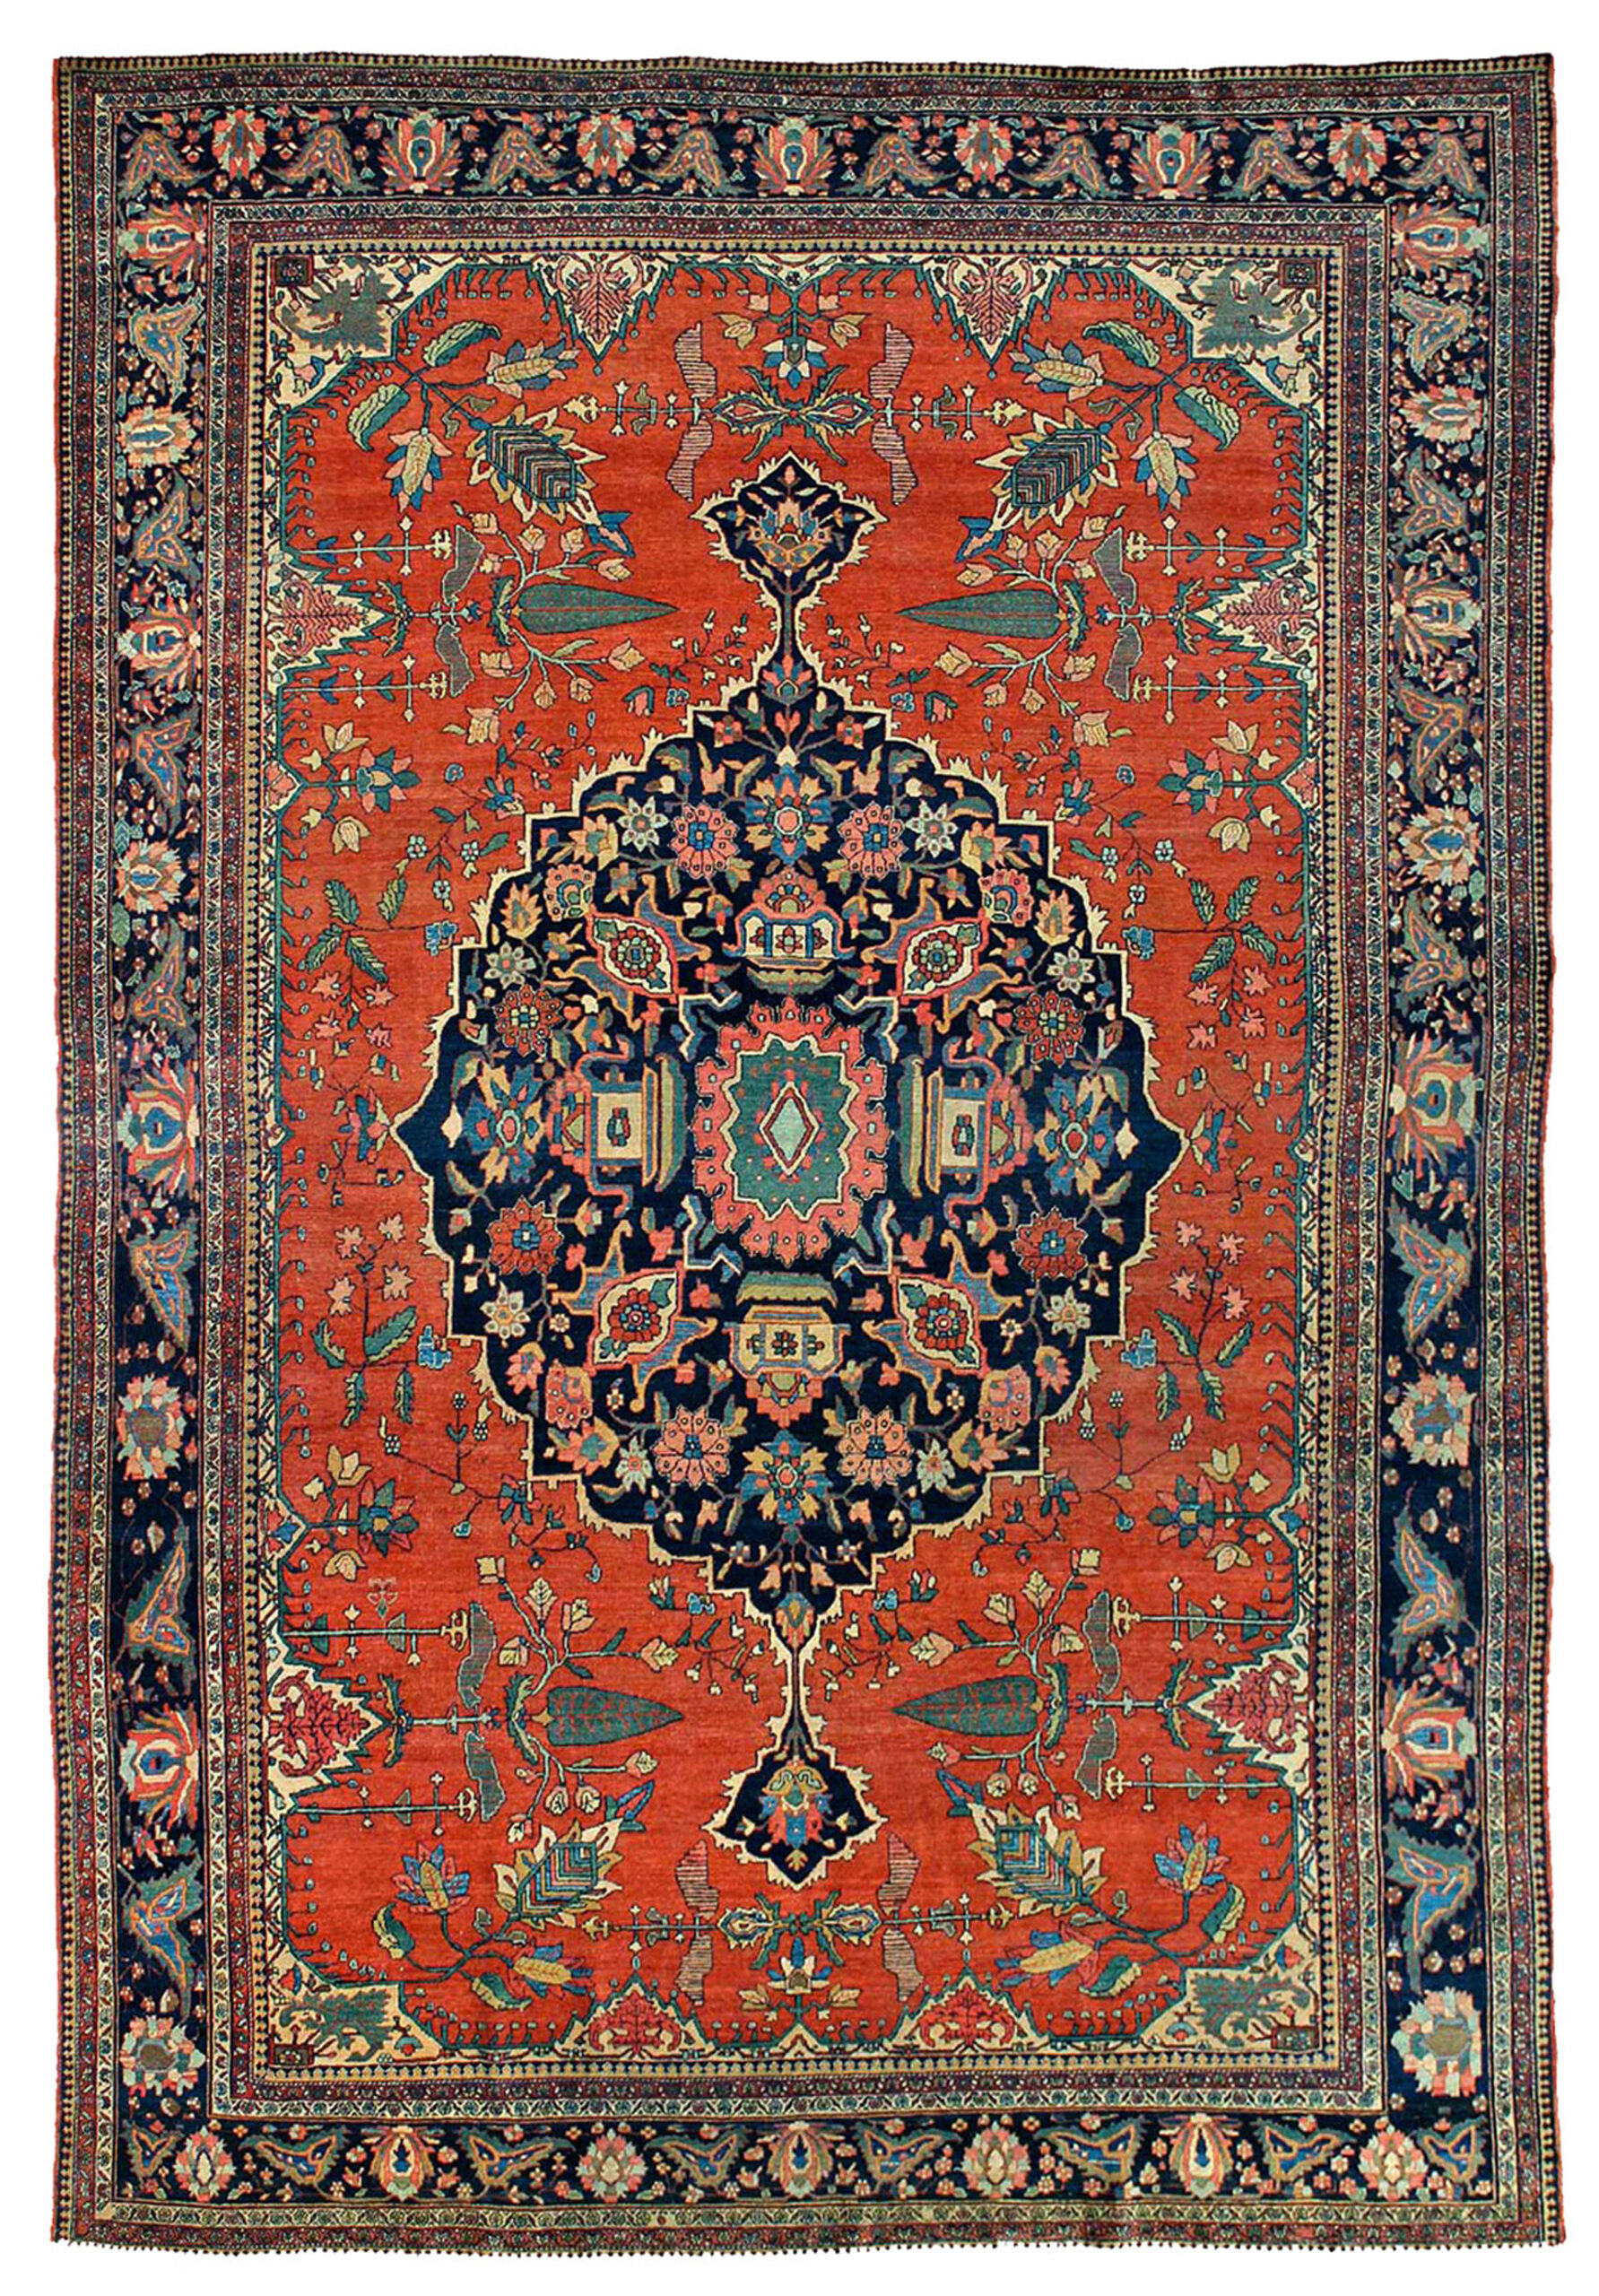 Antique Fereghan Sarouk carpet with a central medallion and Cypress Trees on a brick red field